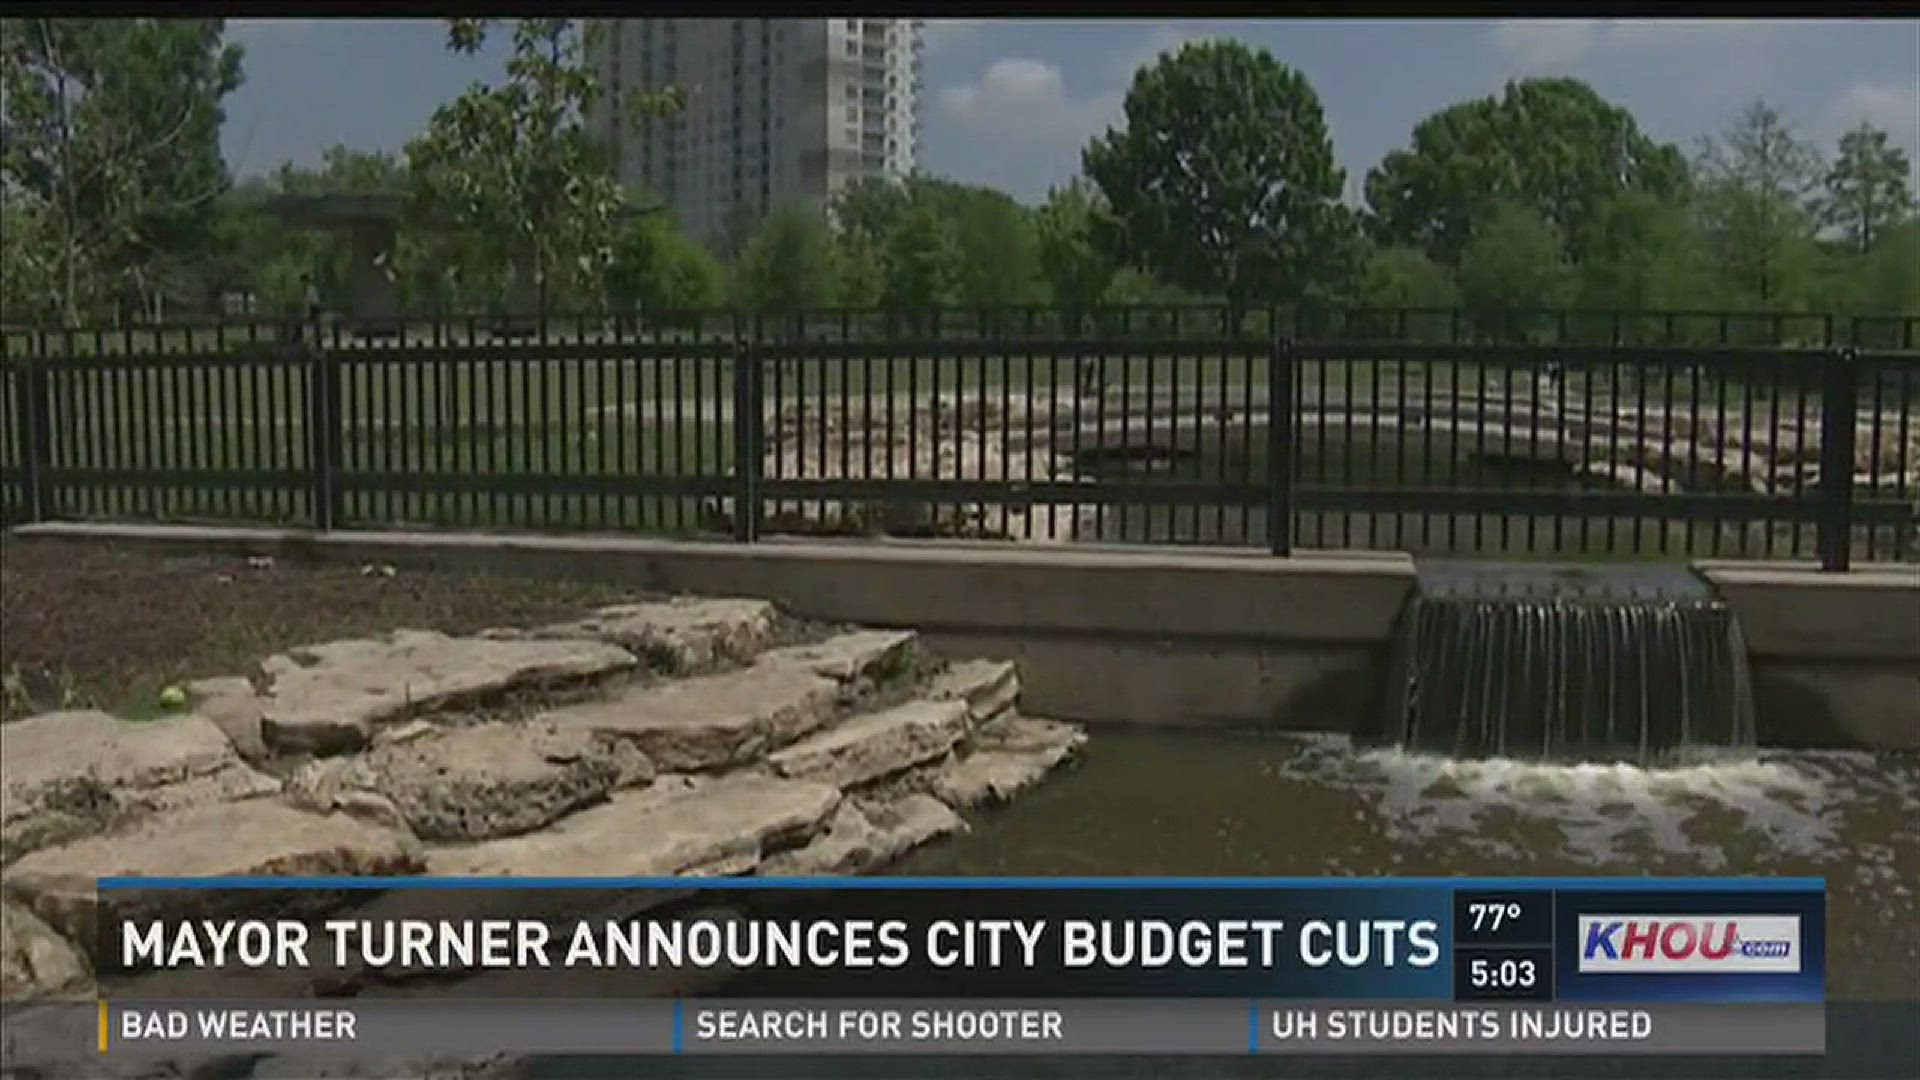 Mayor Sylvester Turner said Friday he's found a way to save more than a thousand city jobs with his new budget. Turner's budget will cut 90 jobs, but he says it could have been much worse because of a $160-million shortfall.